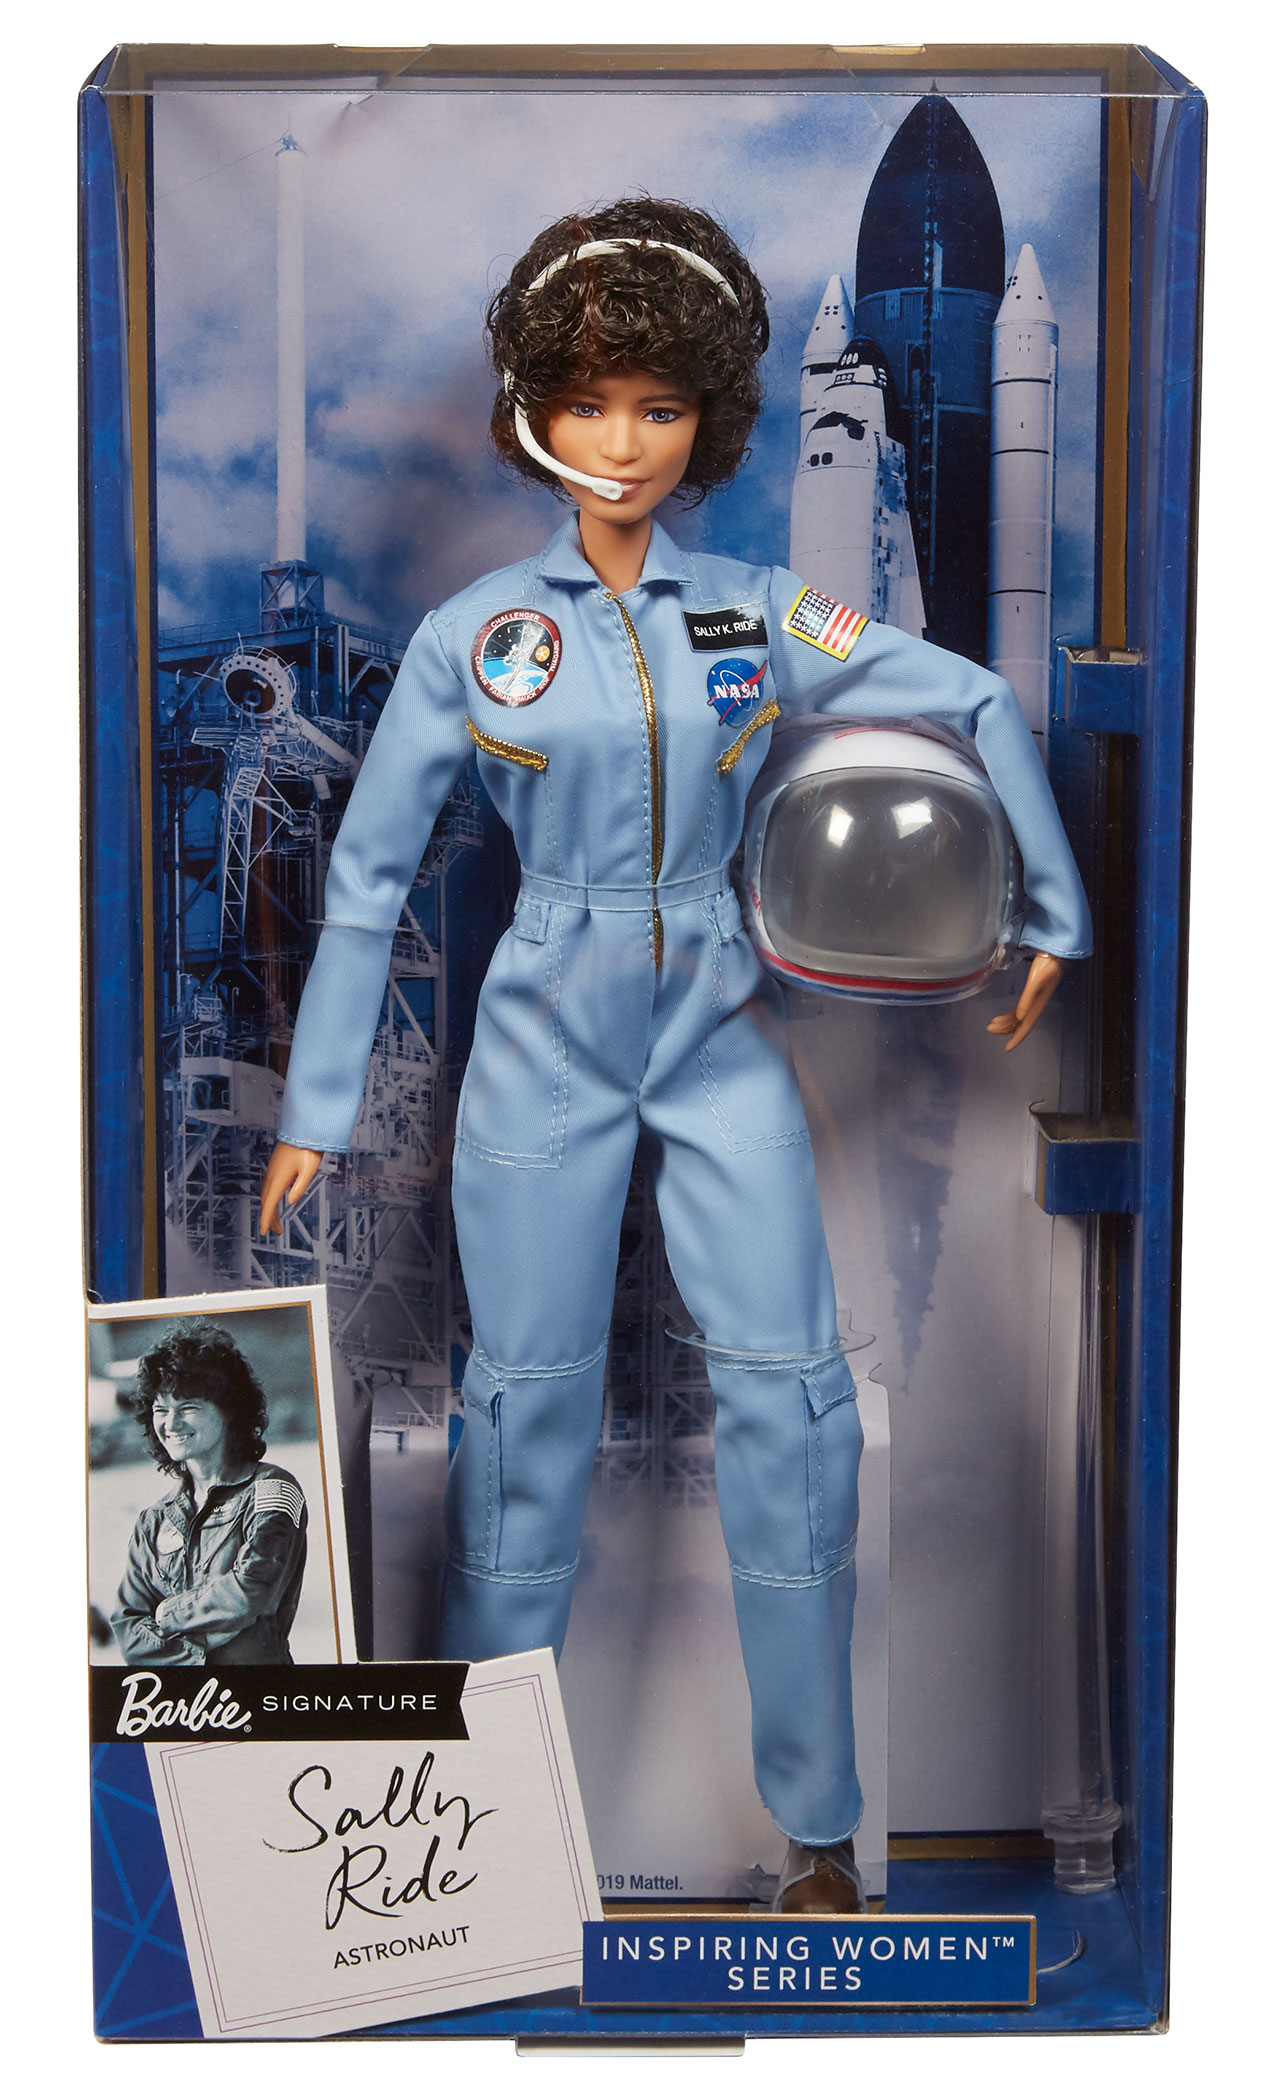 Barbie hails astronaut Sally Ride with new Women' doll collectSPACE